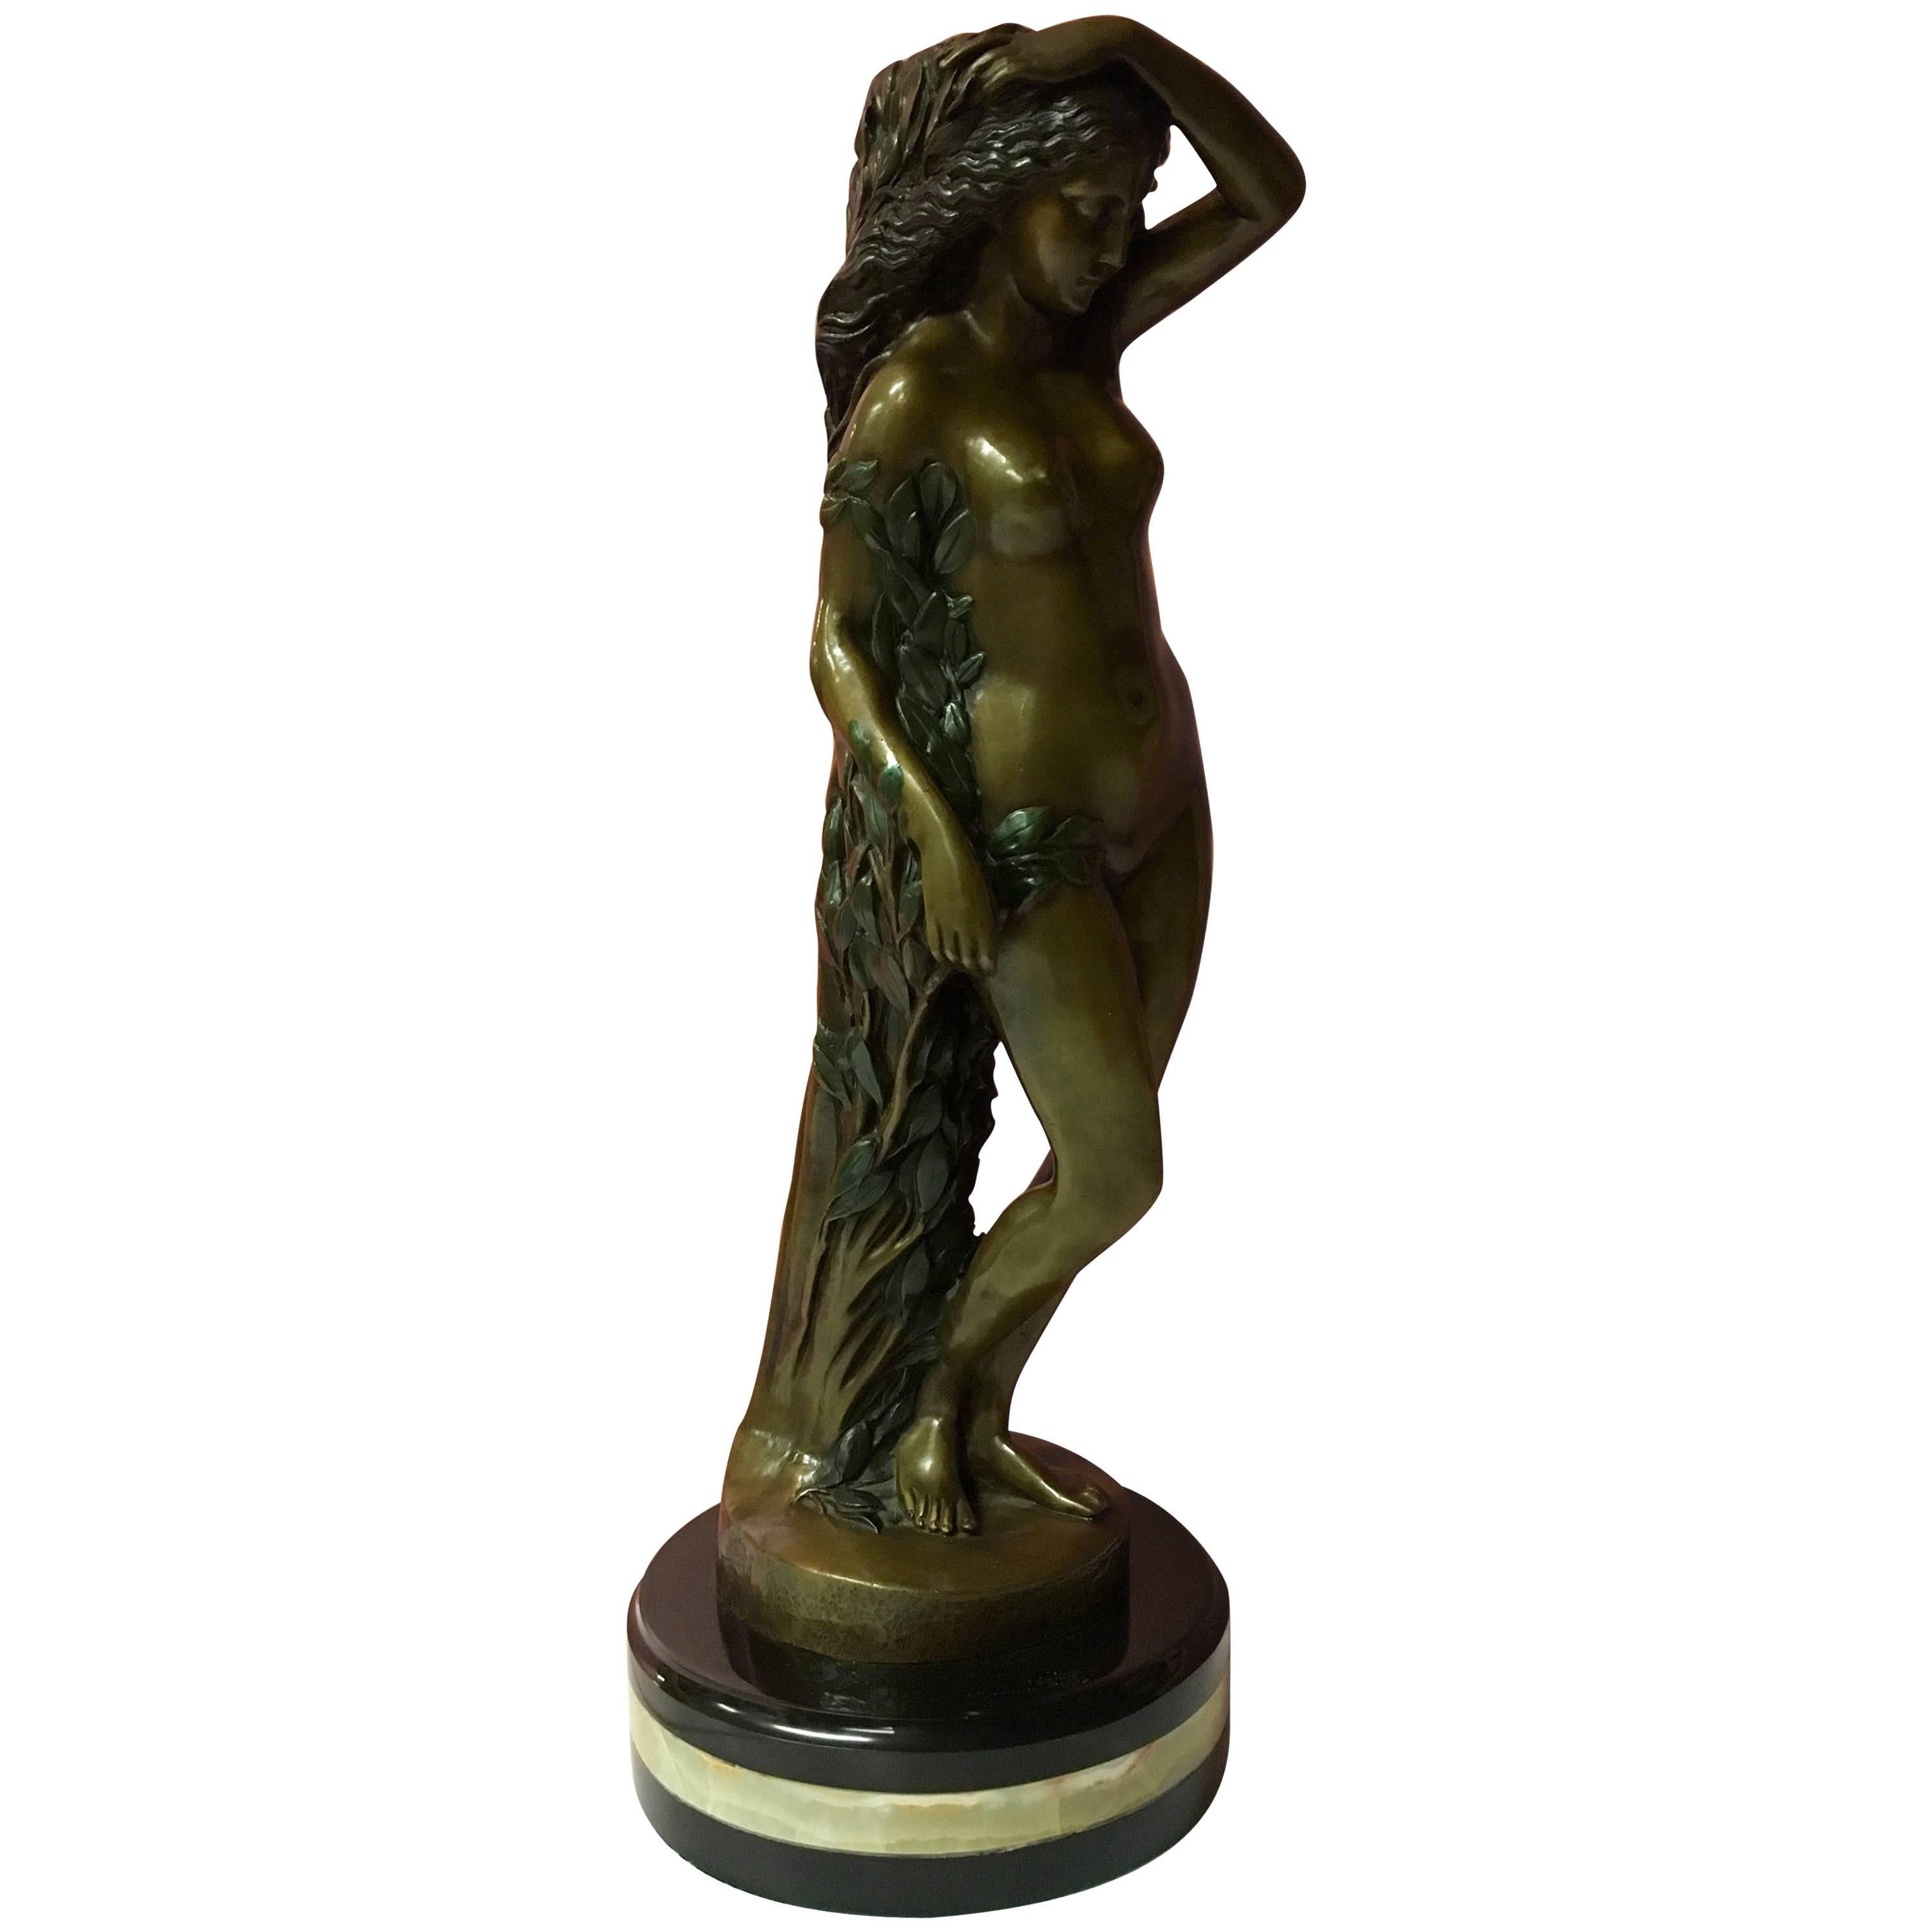 Tall Bronze and Marble Sculpture of a Nude Woman Entitled "The Vine"